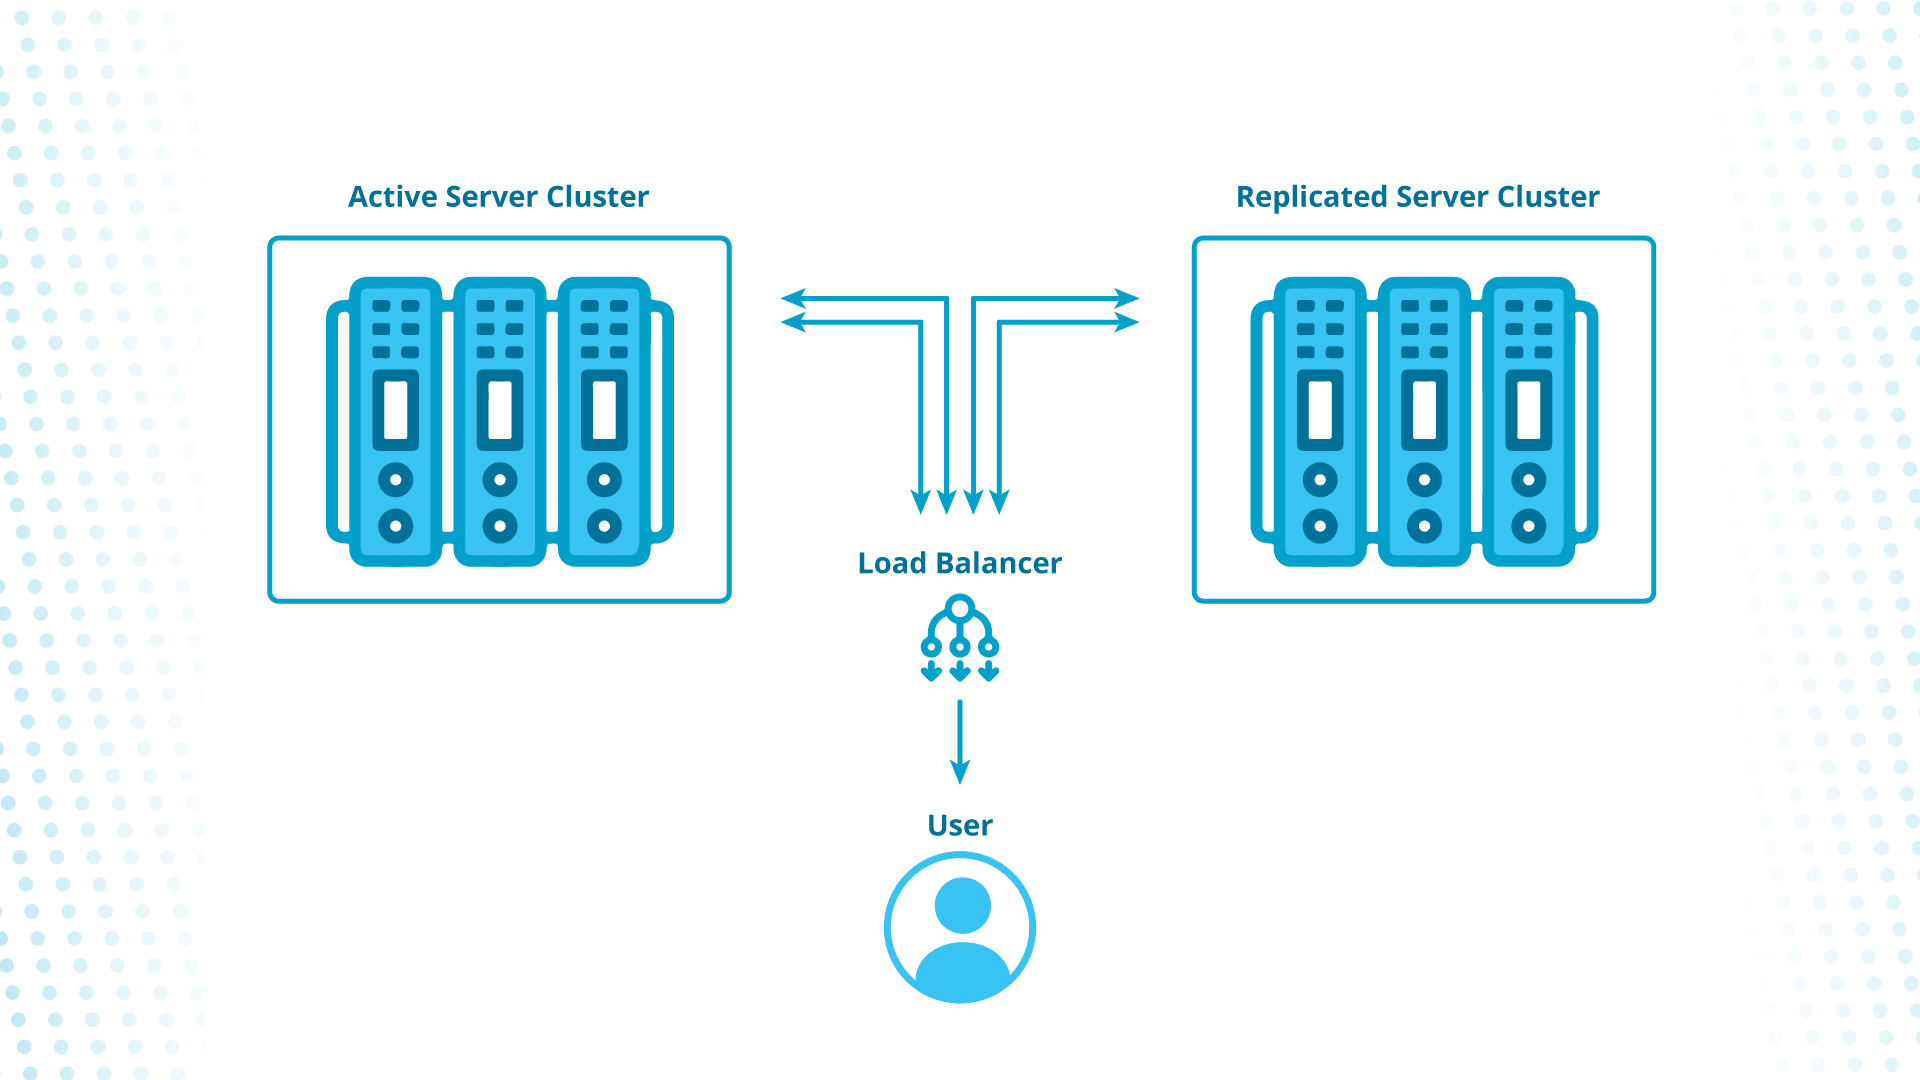 High availability architecture ensures minimal downtime.